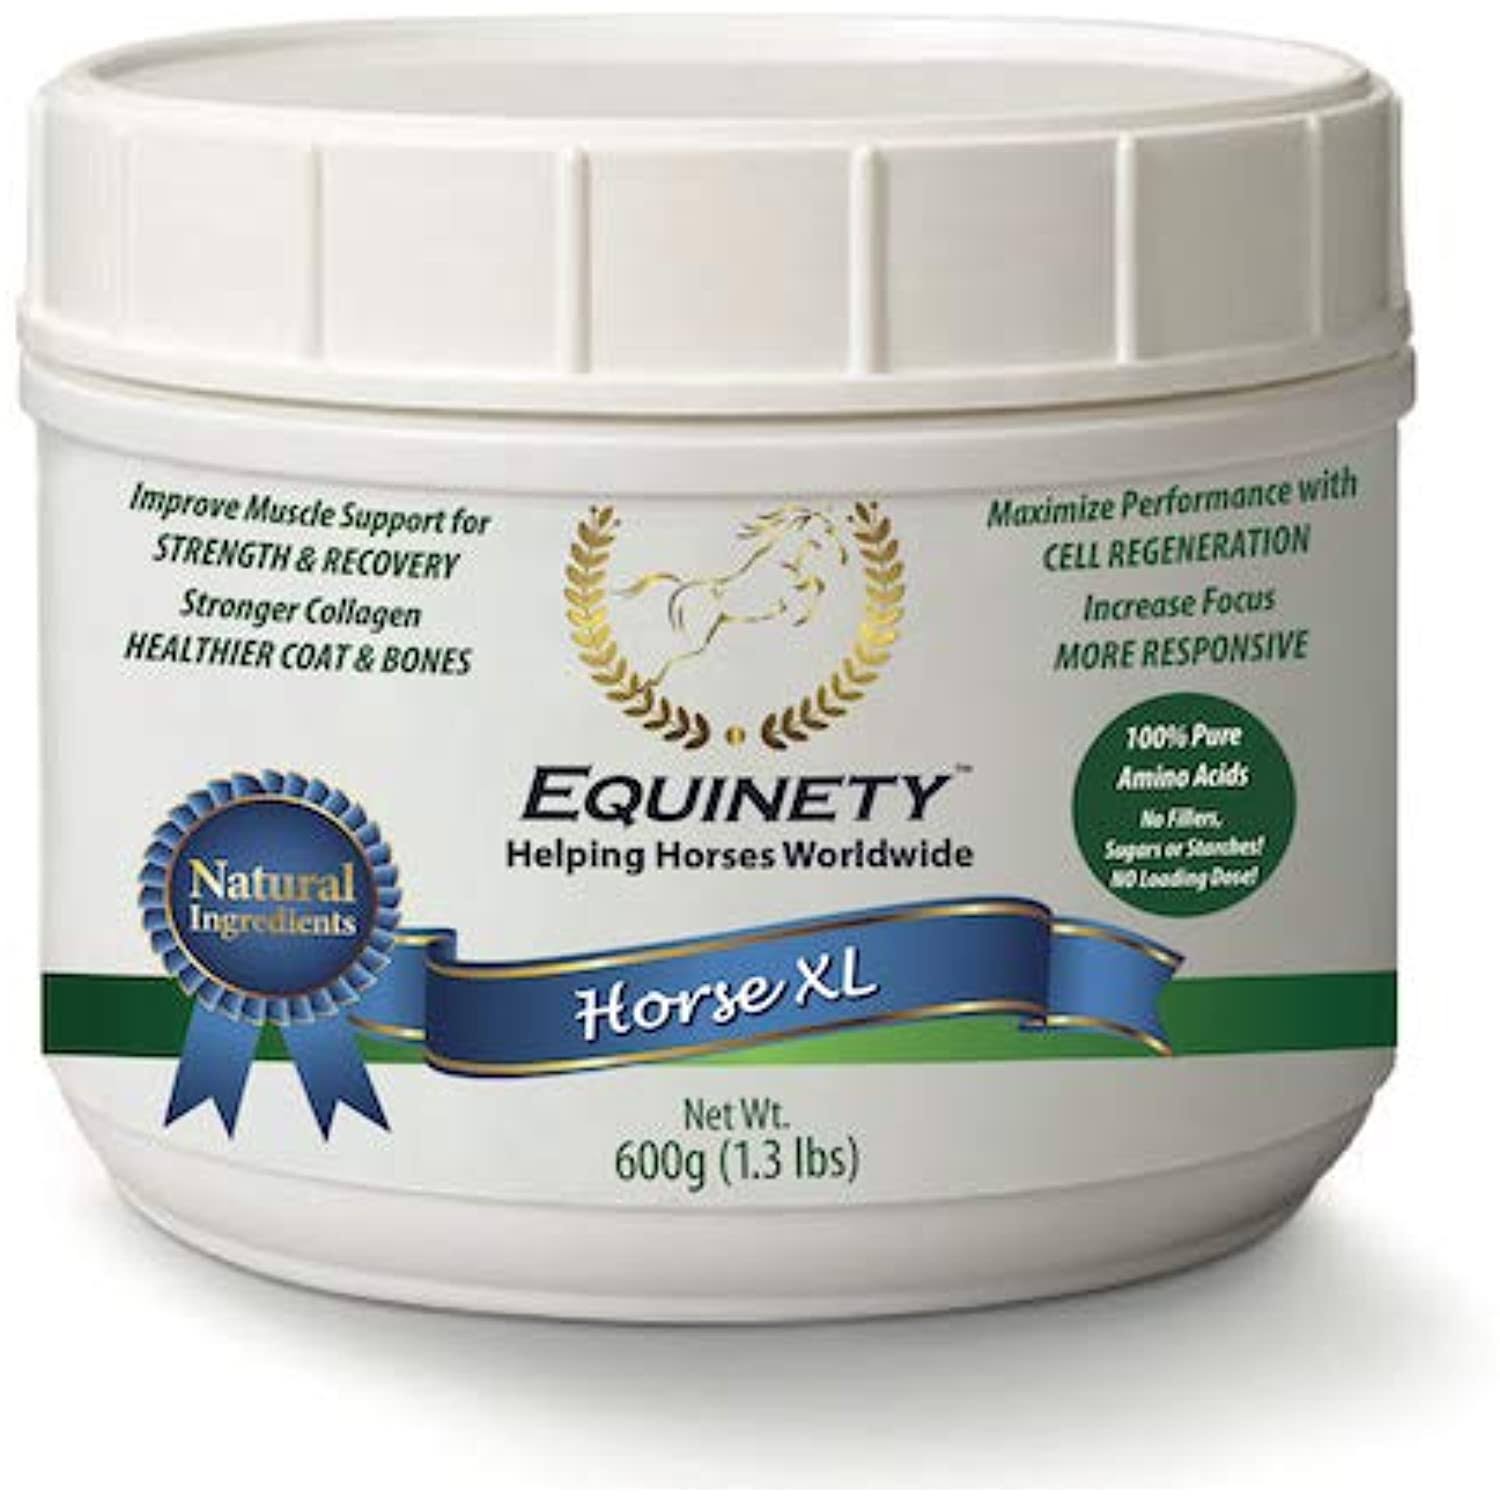 Hobart Labs Numotizine Medicated Poultice 6 lb